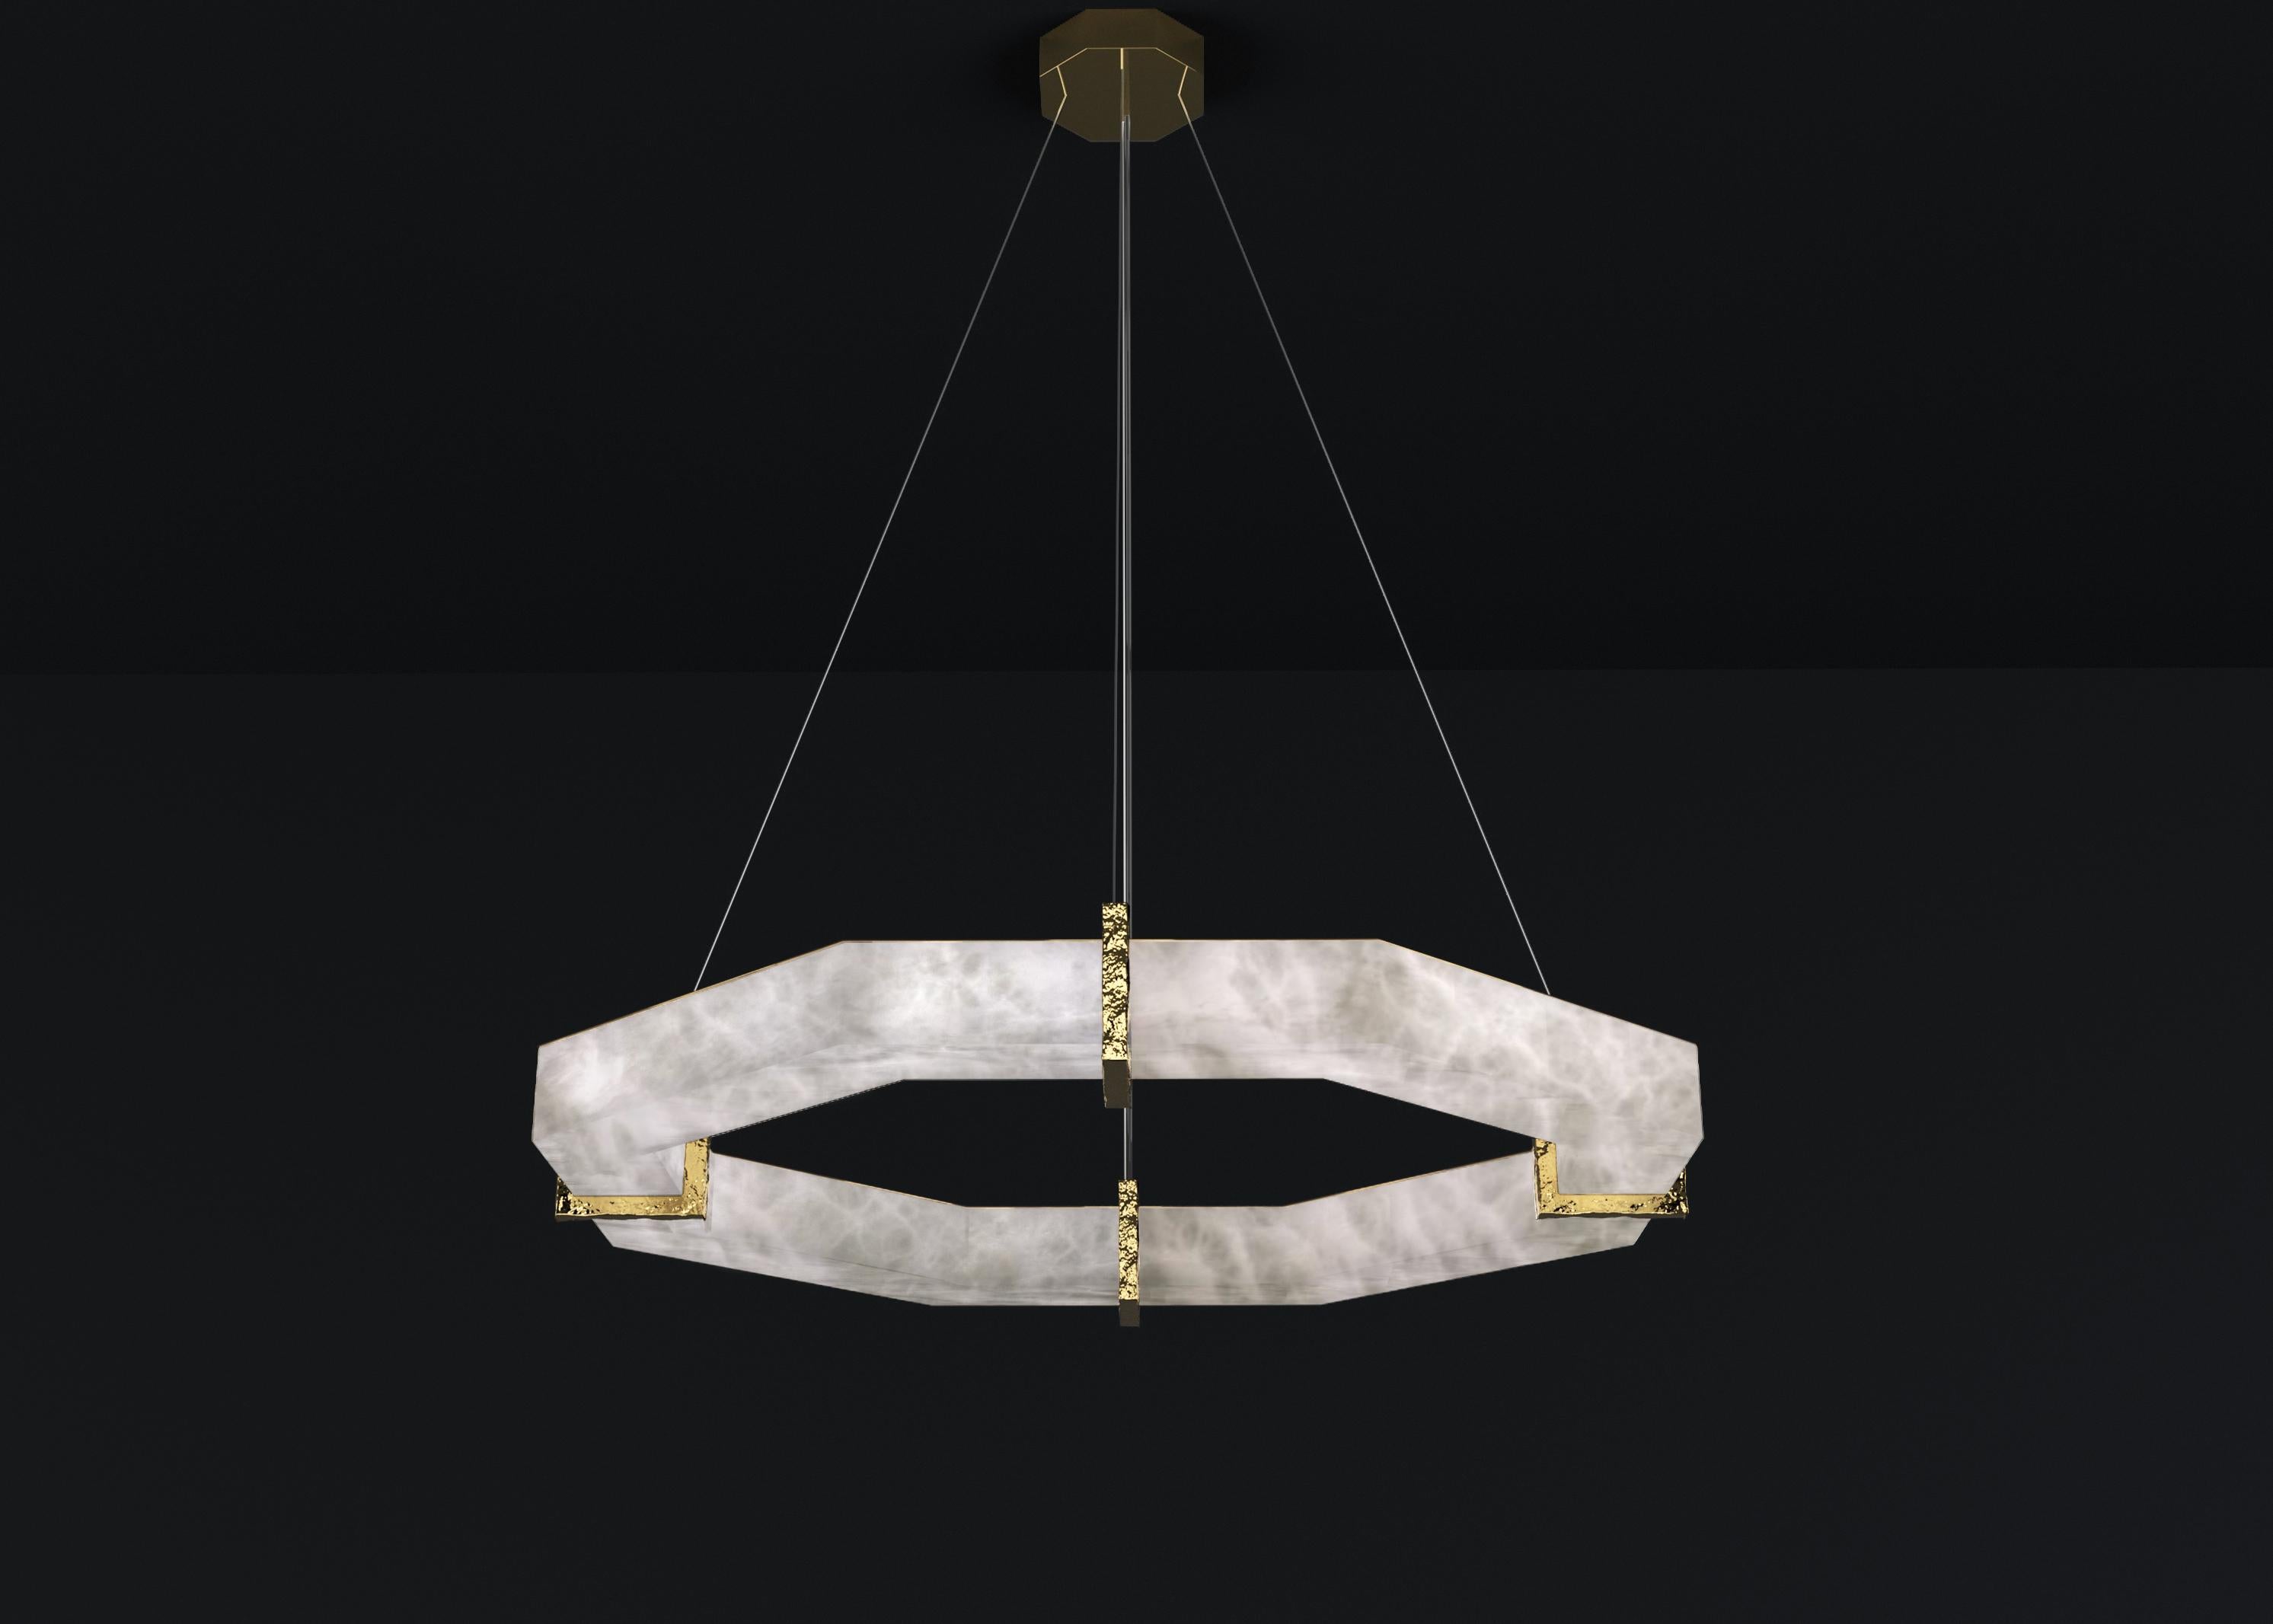 Efesto Shiny Gold Metal Pendant Lamp by Alabastro Italiano
Dimensions: D 83 x W 80 x H 11 cm.
Materials: White alabaster and metal.

Available in different finishes: Shiny Silver, Bronze, Brushed Brass, Ruggine of Florence, Brushed Burnished, Shiny